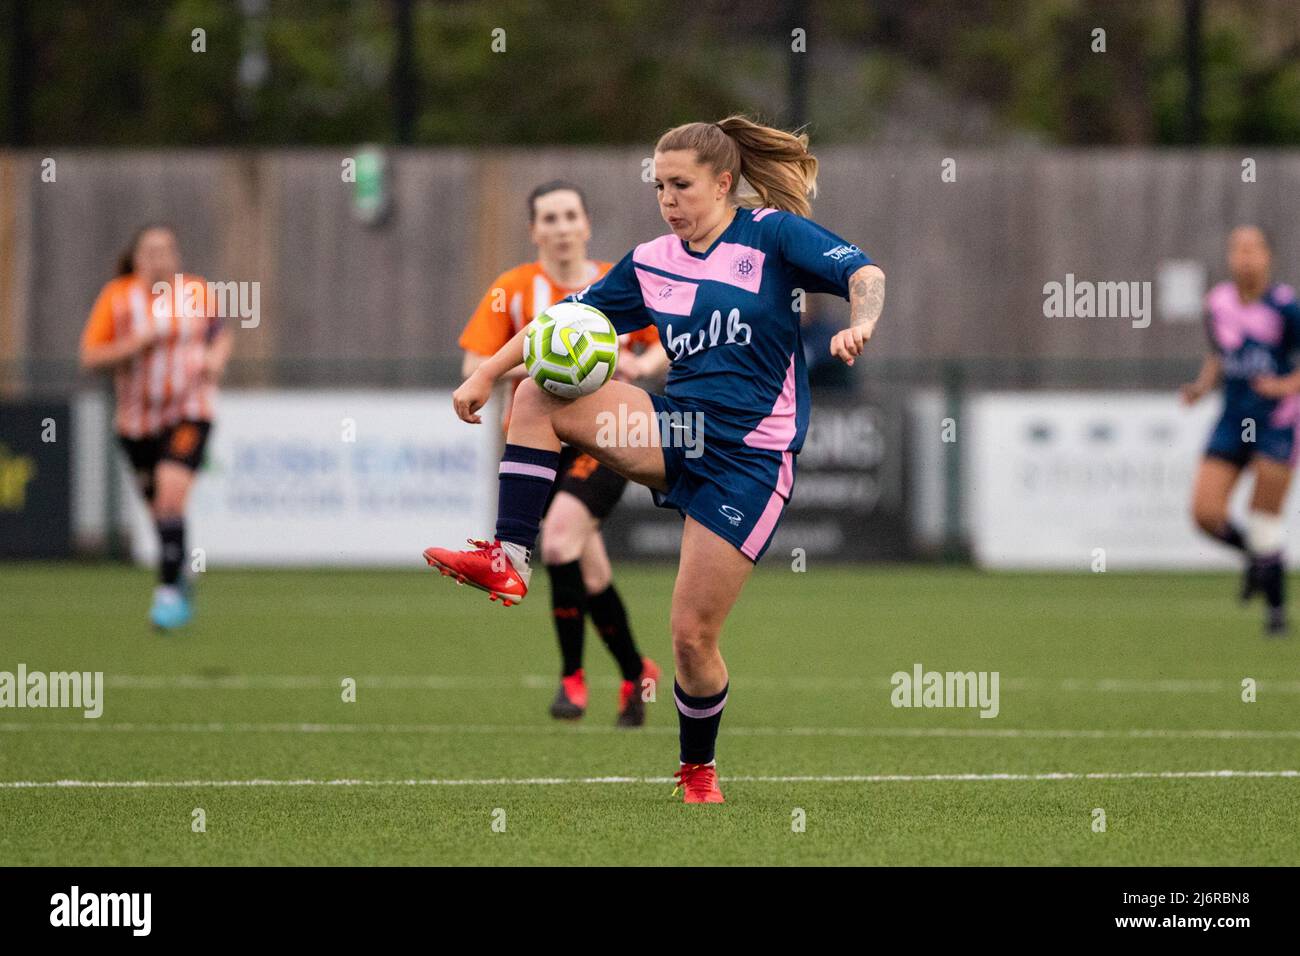 London, England. 03/05/2022, Sophie Manzi (9 Dulwich Hamlet) in action during the Capital Womens Senior Cup game between Ashford (Middlesex) and Dulwich Hamlet at Meadowbank in London, England.  Liam Asman/SPP Stock Photo